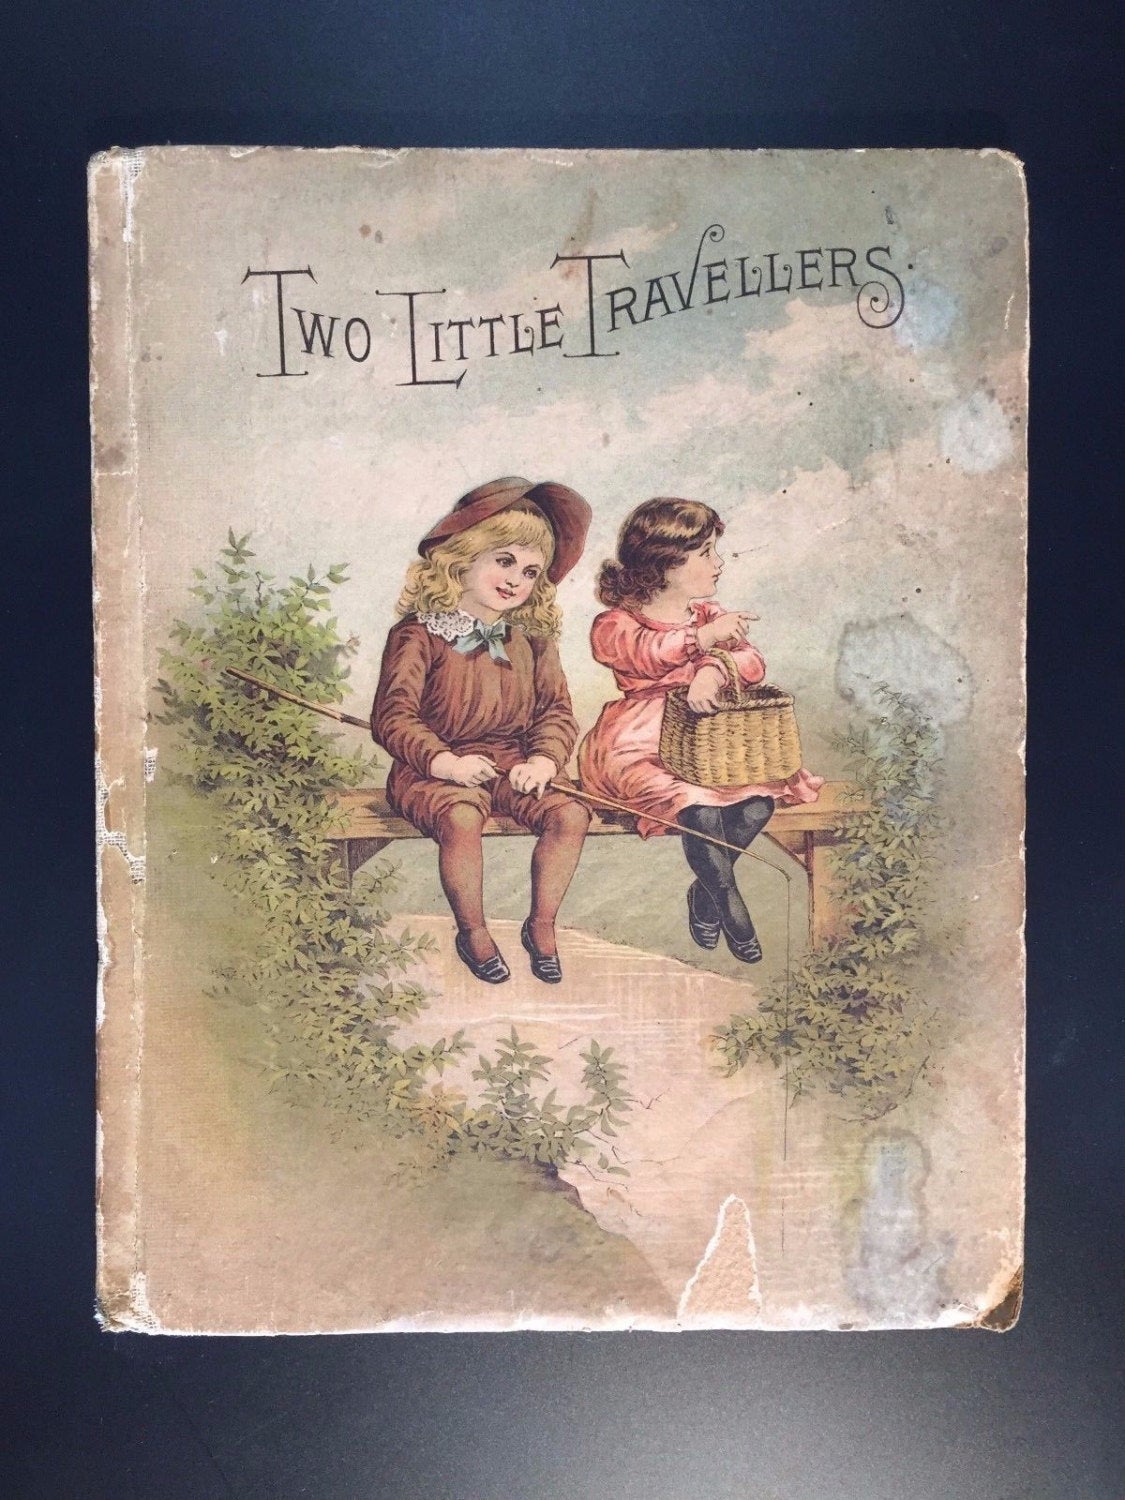 Two Little Travelers, Frances A. Humphrey, Illustrated by George F. Barnes, 1883